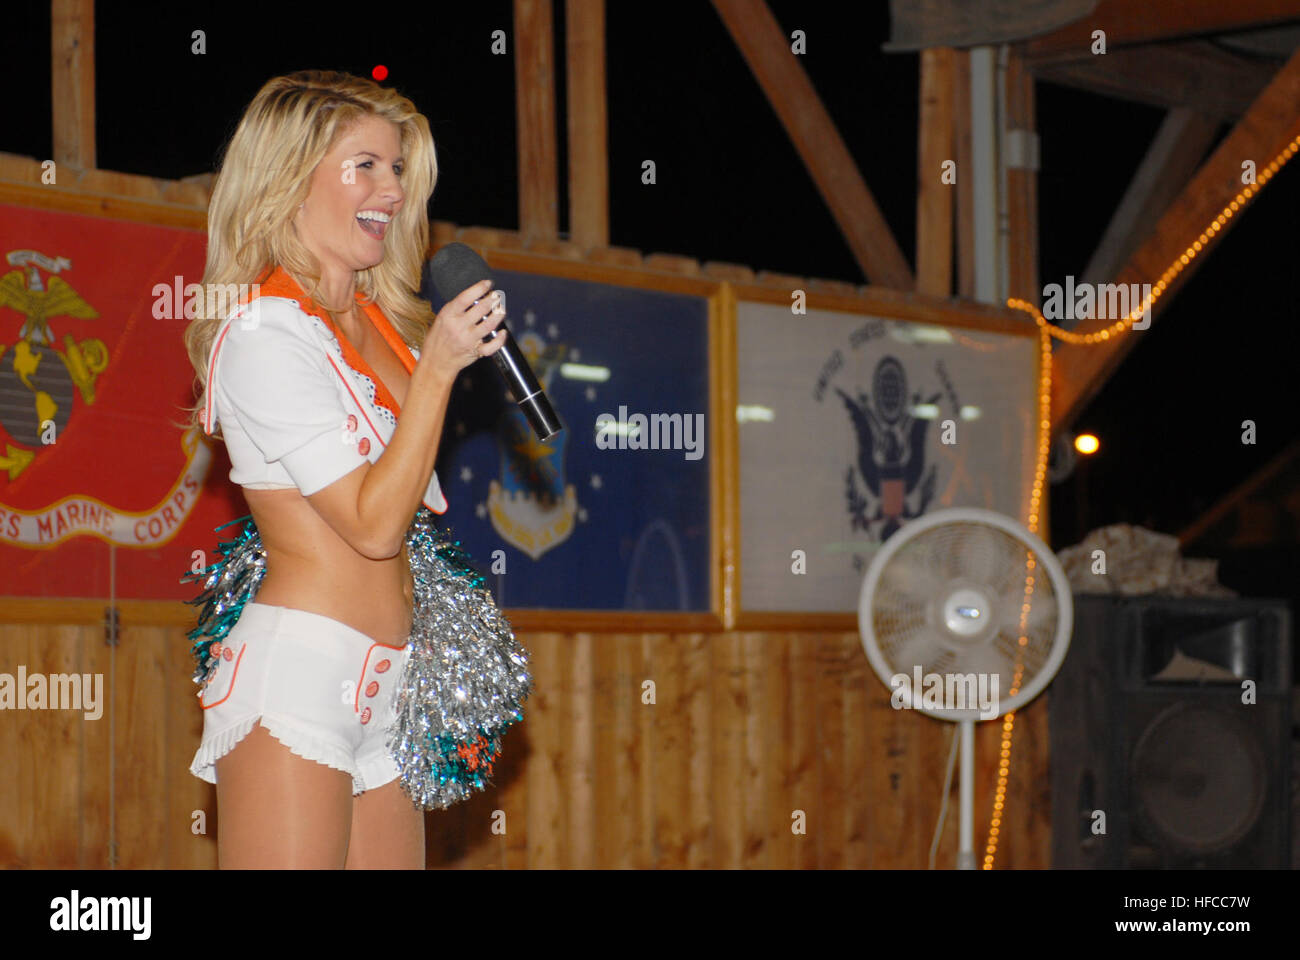 Miami Dolphins' cheerleaders entertained Soldiers, Sailors, Marines and Airmen on a tour of the area. They performed a few dance routines and signed autographs for the troops. Miami Dolphins' Cheerleaders 76737 Stock Photo